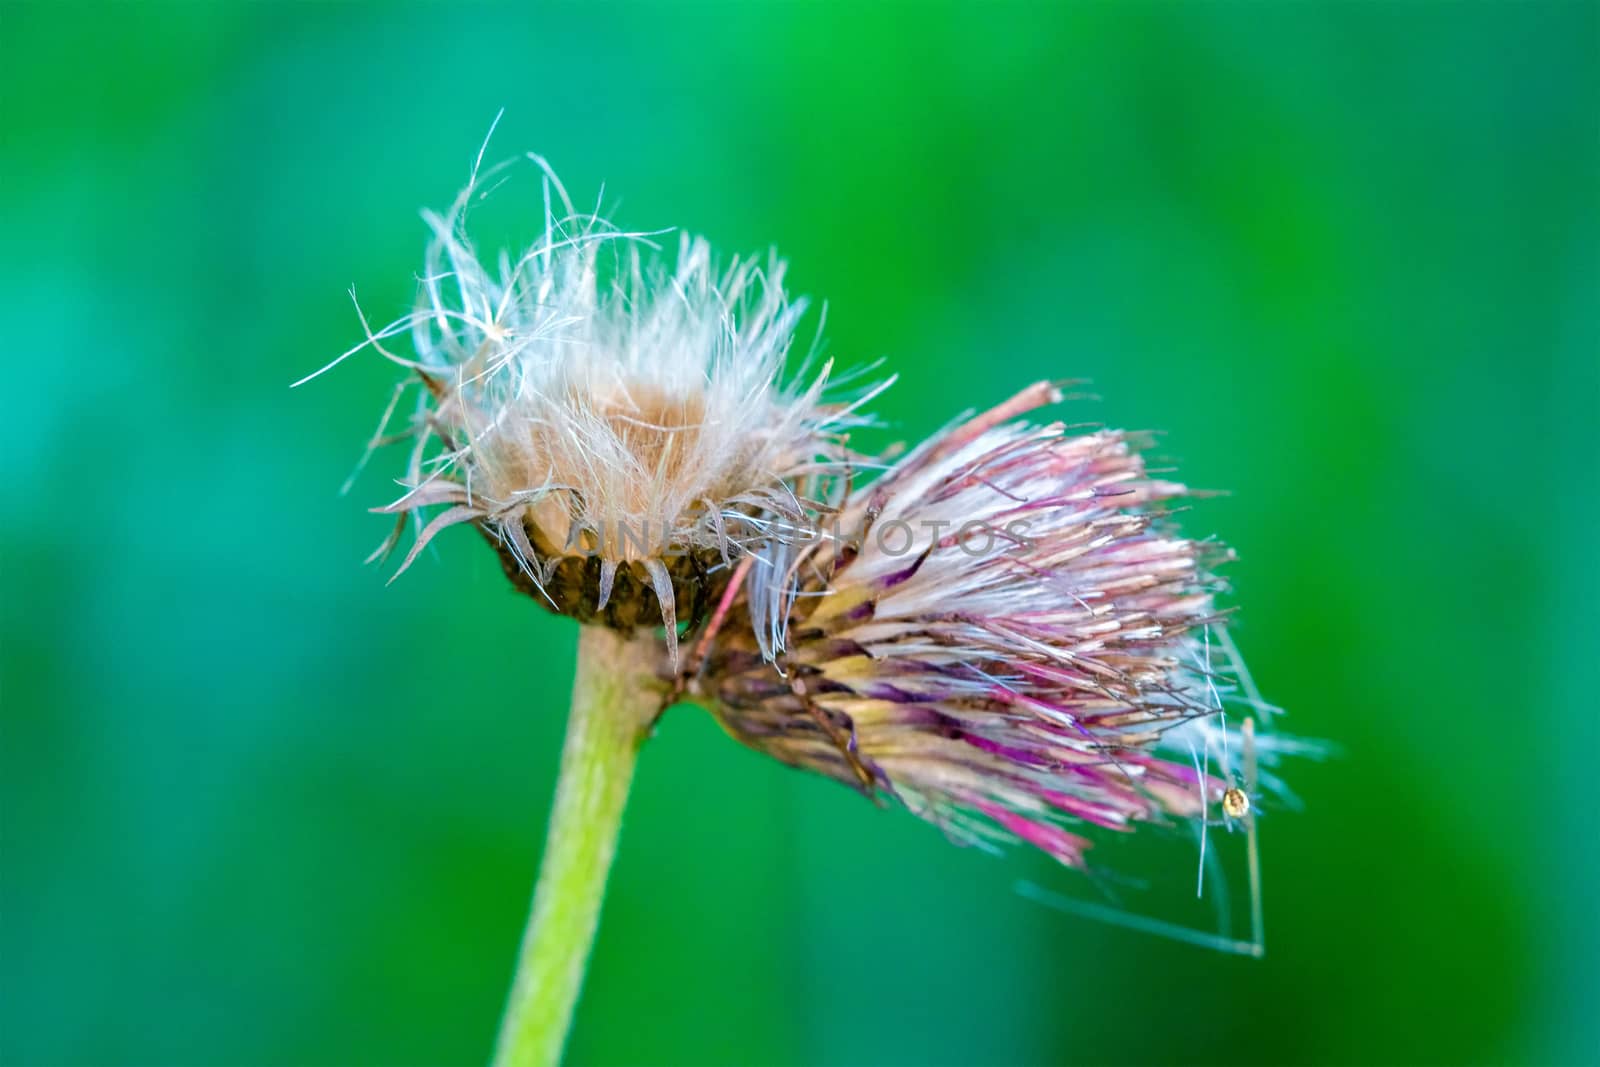 Flower Thistle on a green blurred background